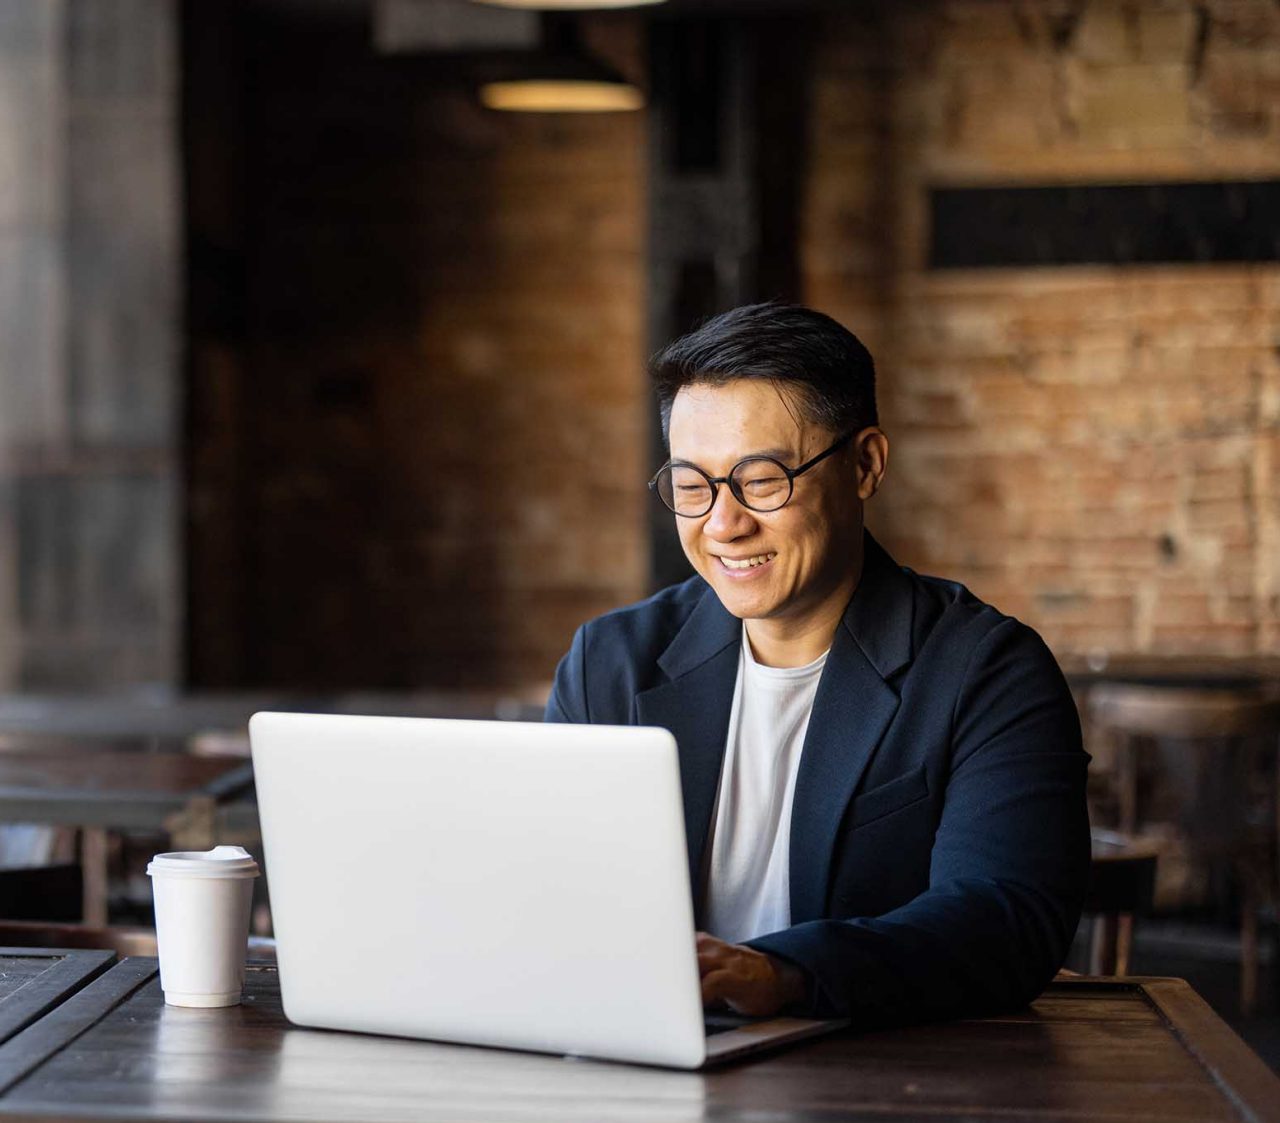 Asian businessman typing on laptop during work in cafe. Concept of remote and freelance work. Smiling adult successful man wearing suit and glasses sitting at wooden desk. Sunny day